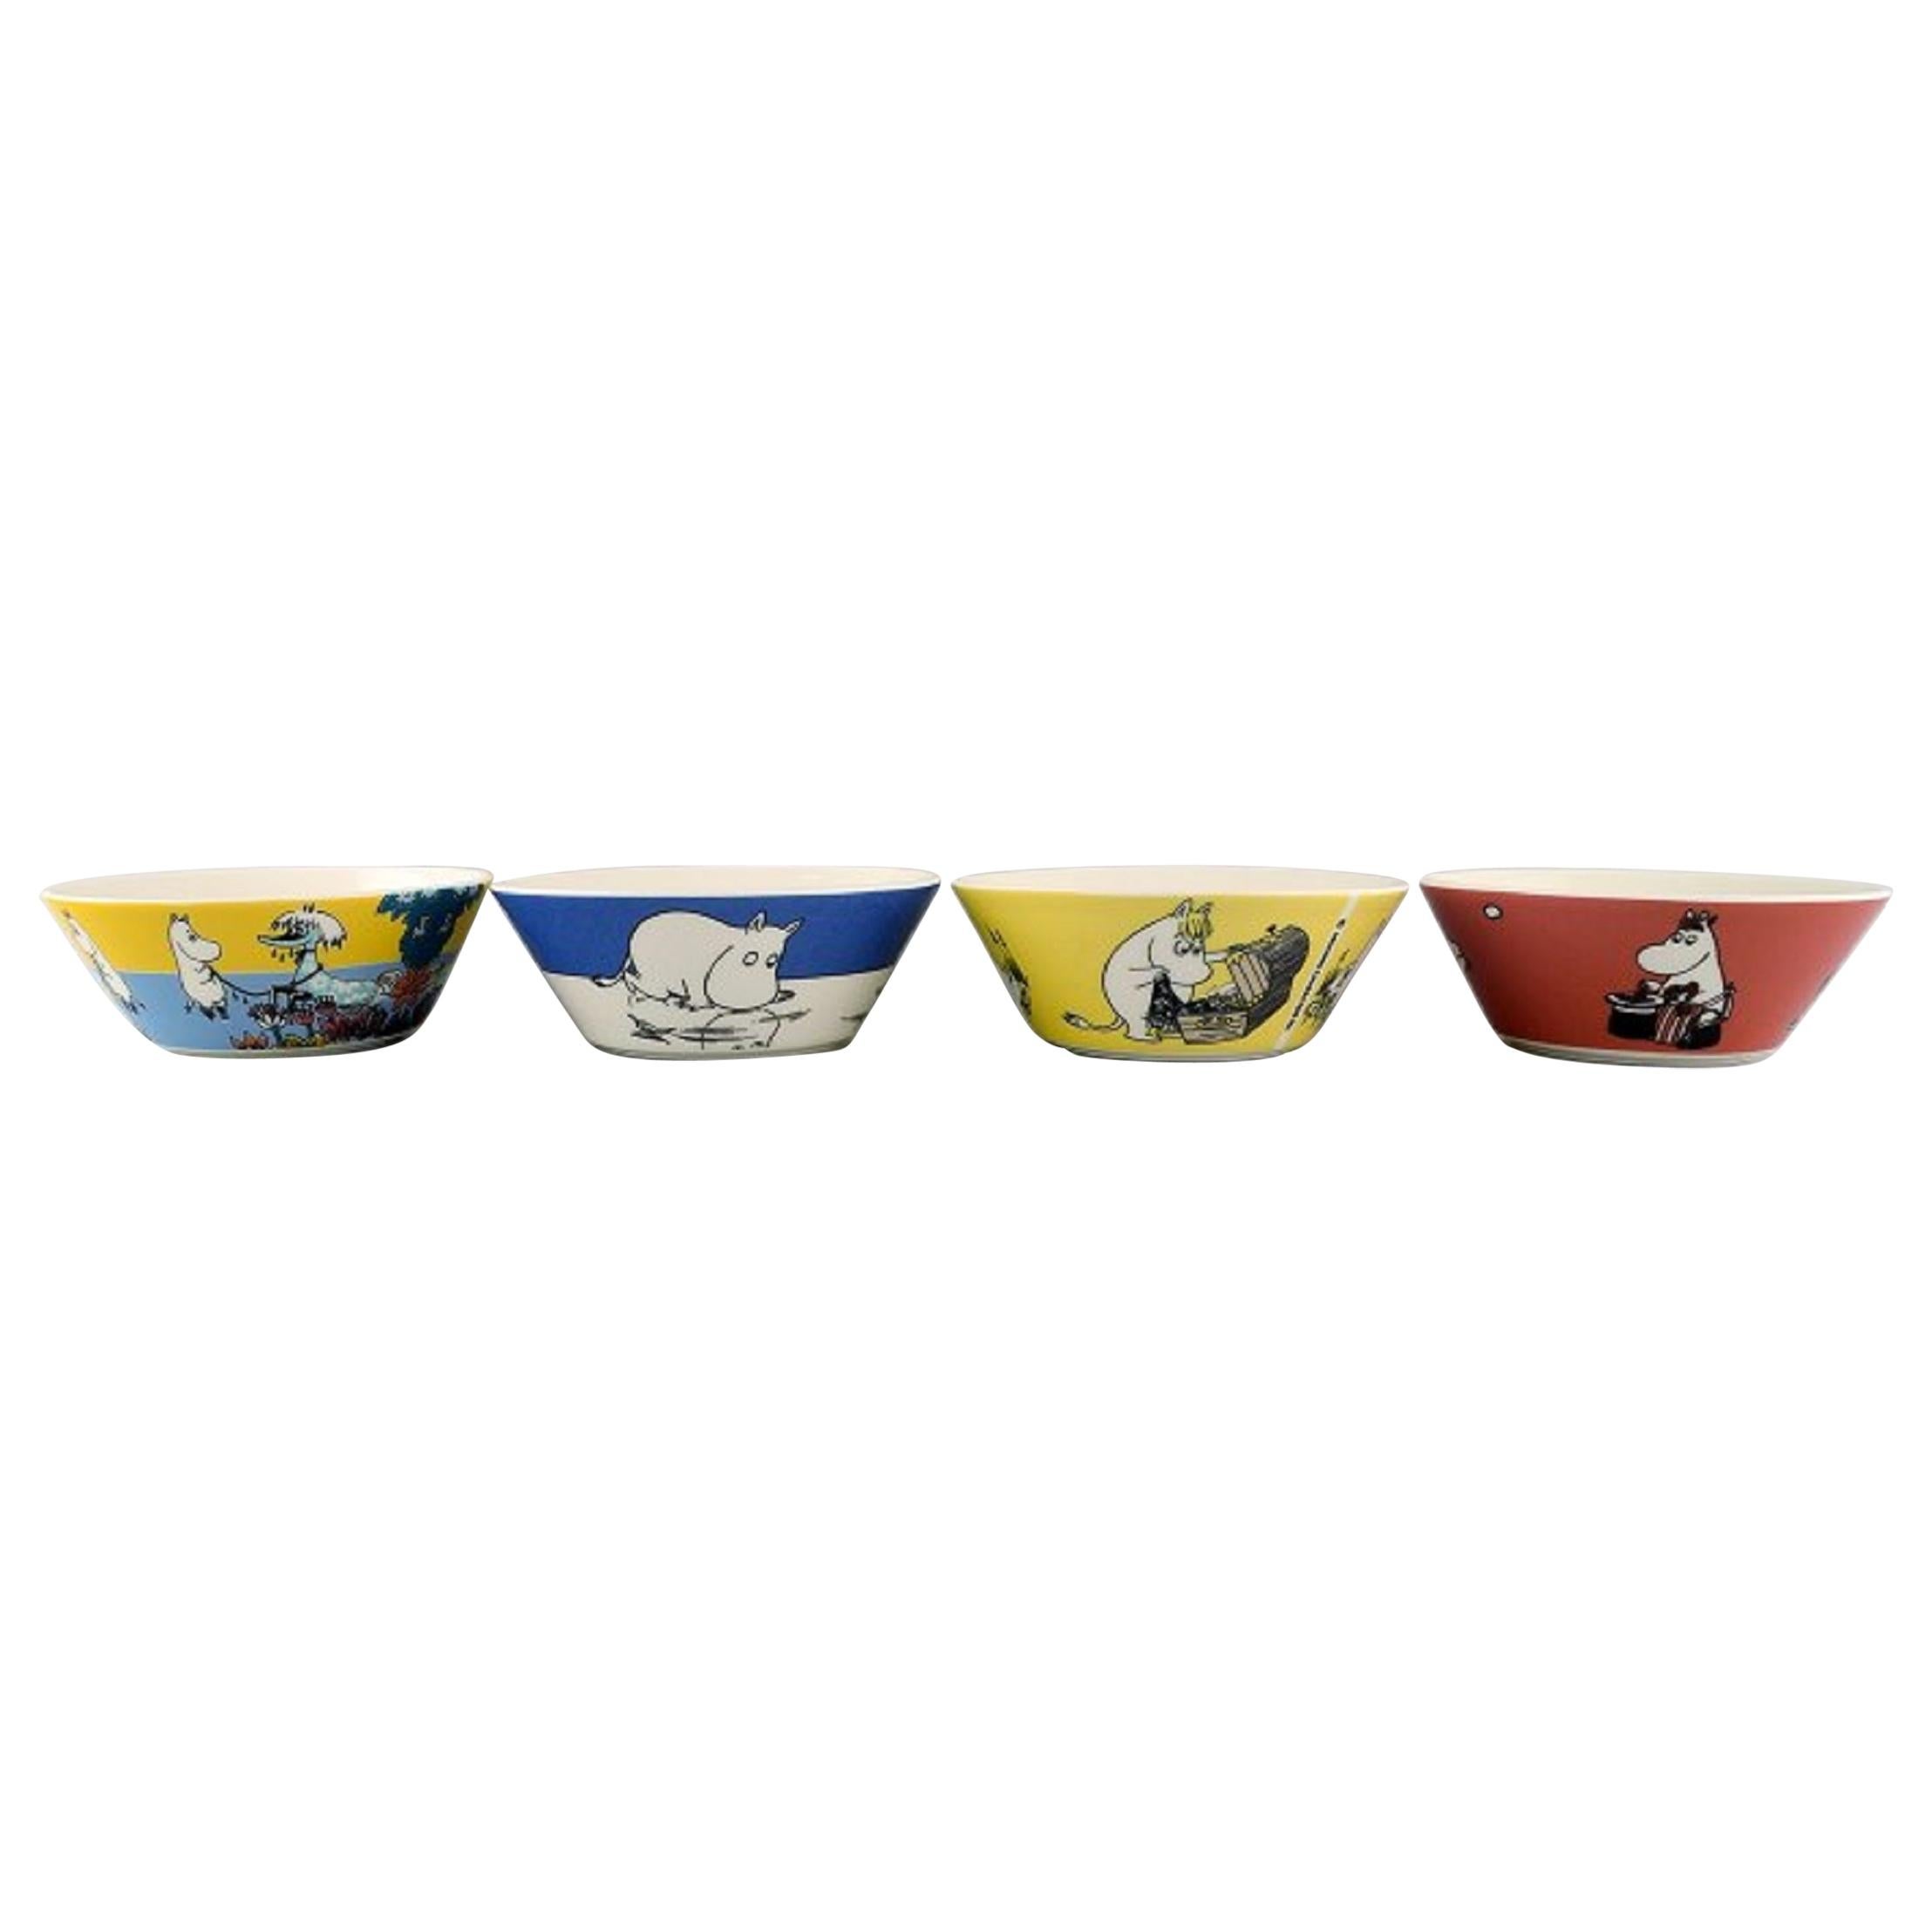 Arabia, Finland, Four Porcelain Bowls with Motifs from "Moomin"